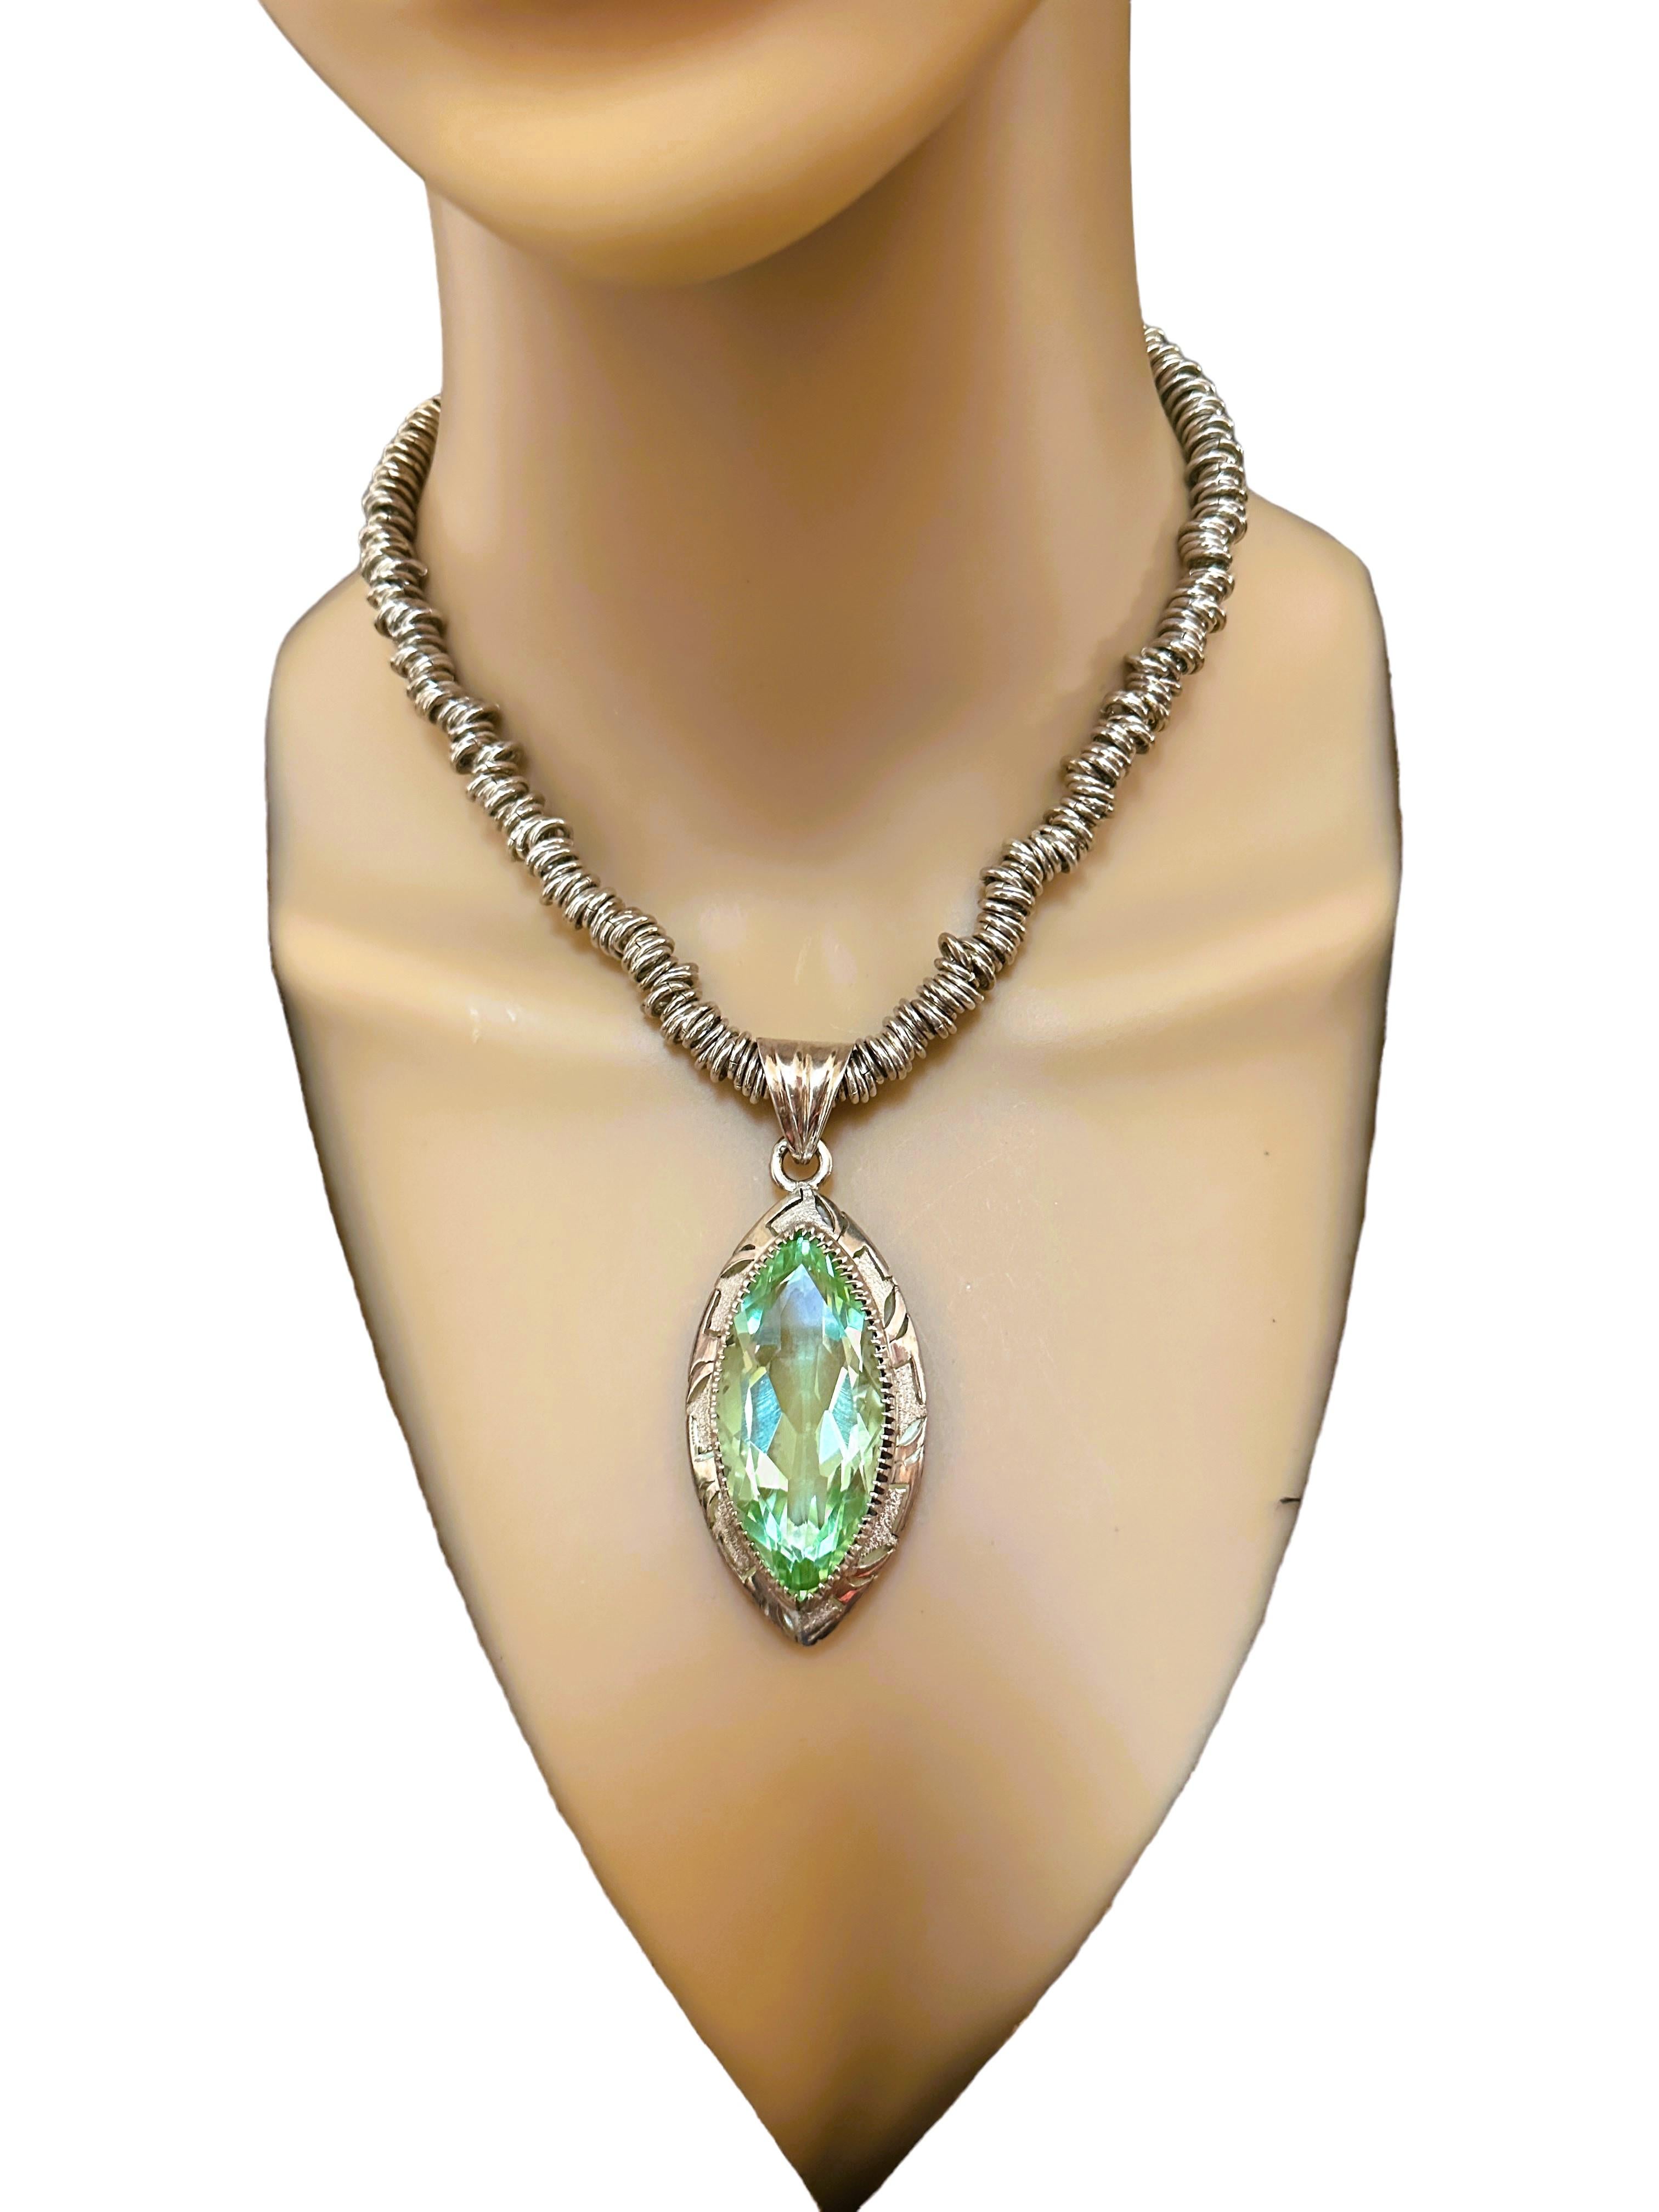 Handmade 16 Inch Ornate Sterling Silver Pendant Necklace with Green Quartz For Sale 5